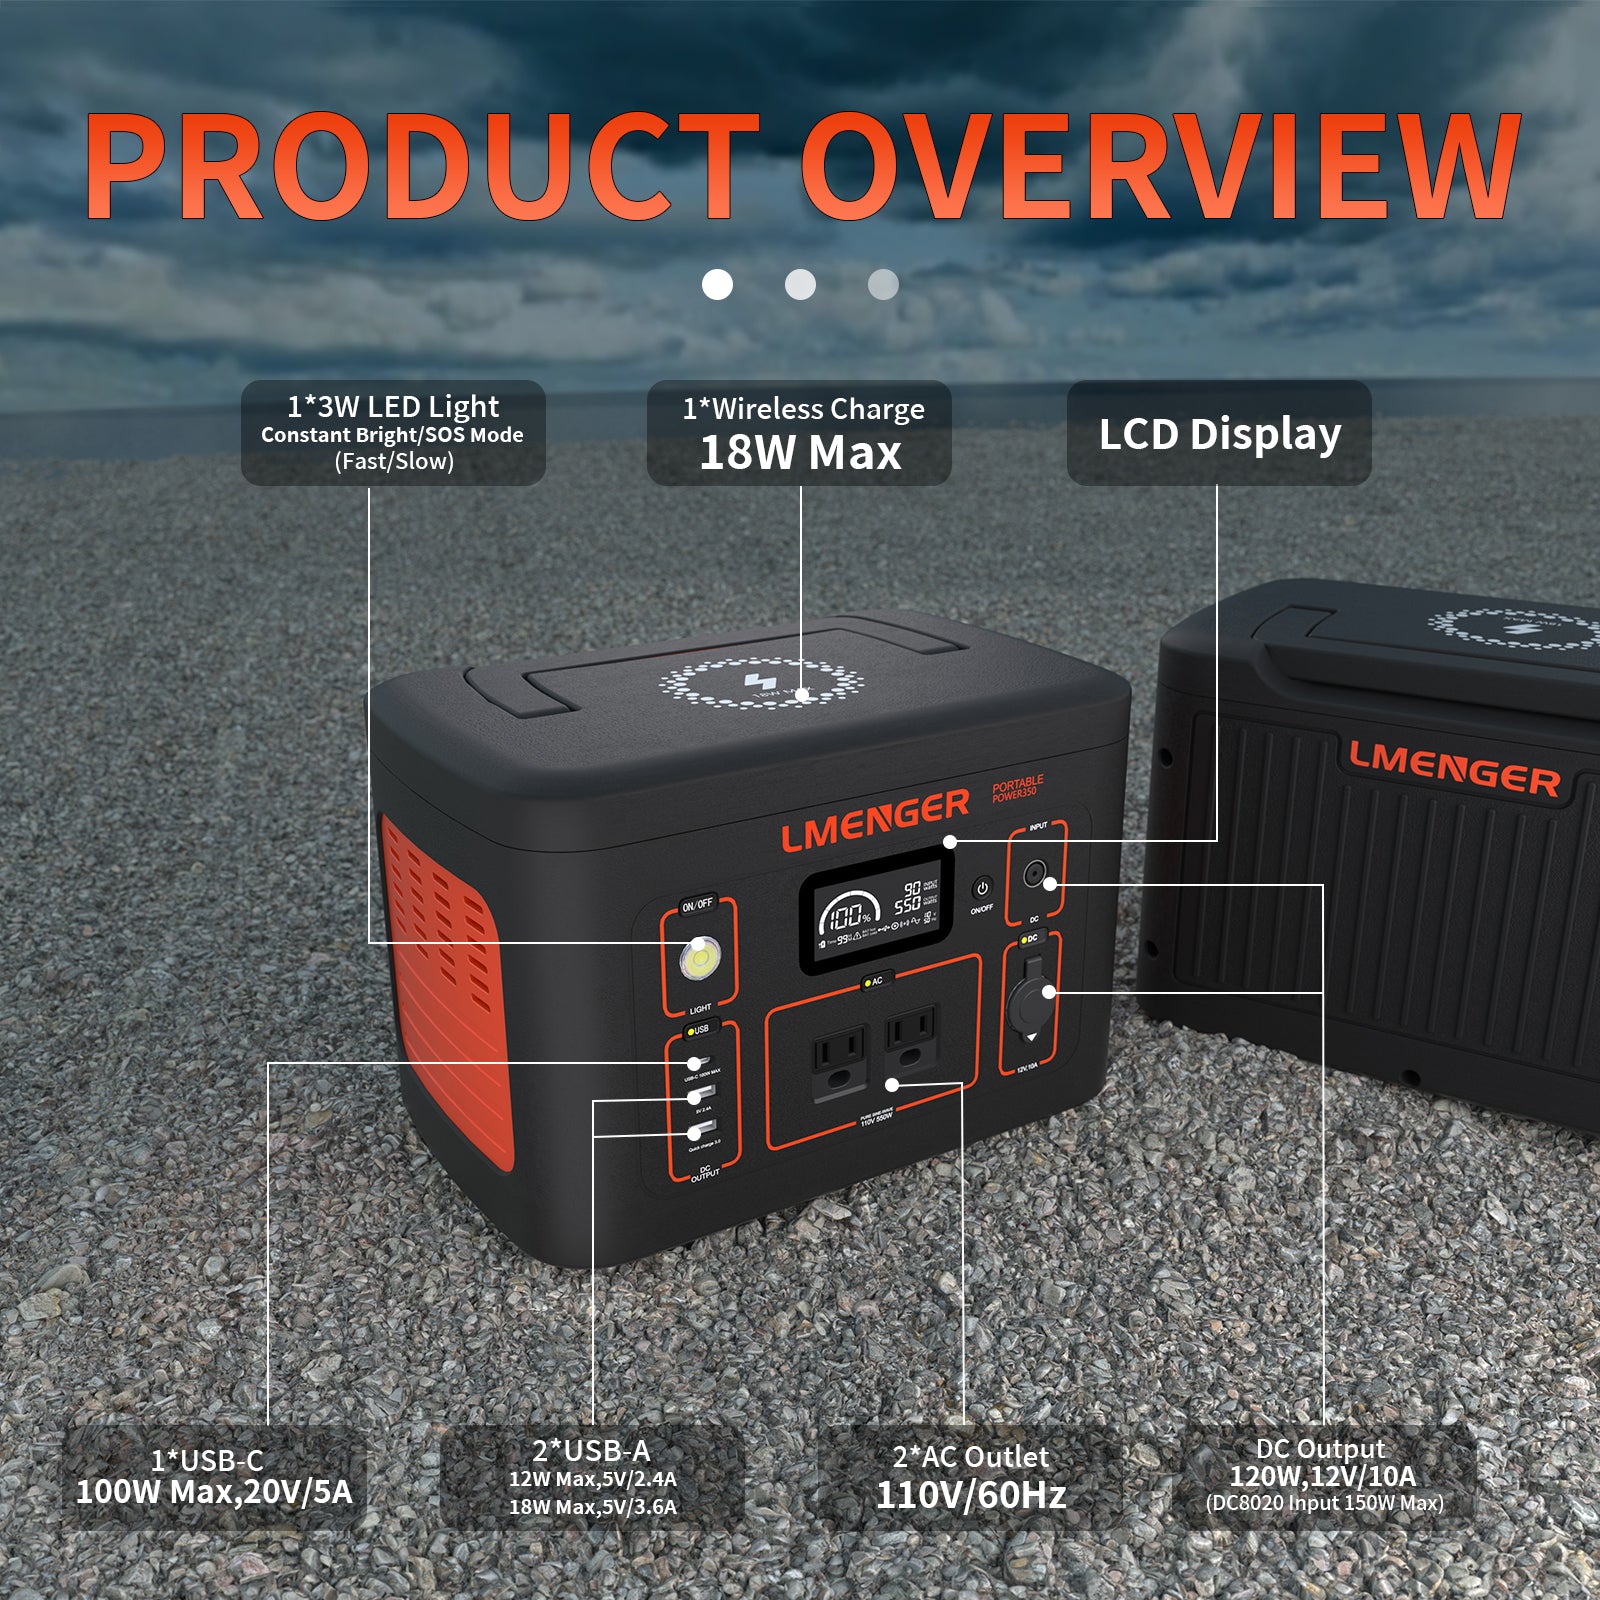 LMENGER K3 Pro Portable Power Station 550W/326Wh with Wireless Charge on Top